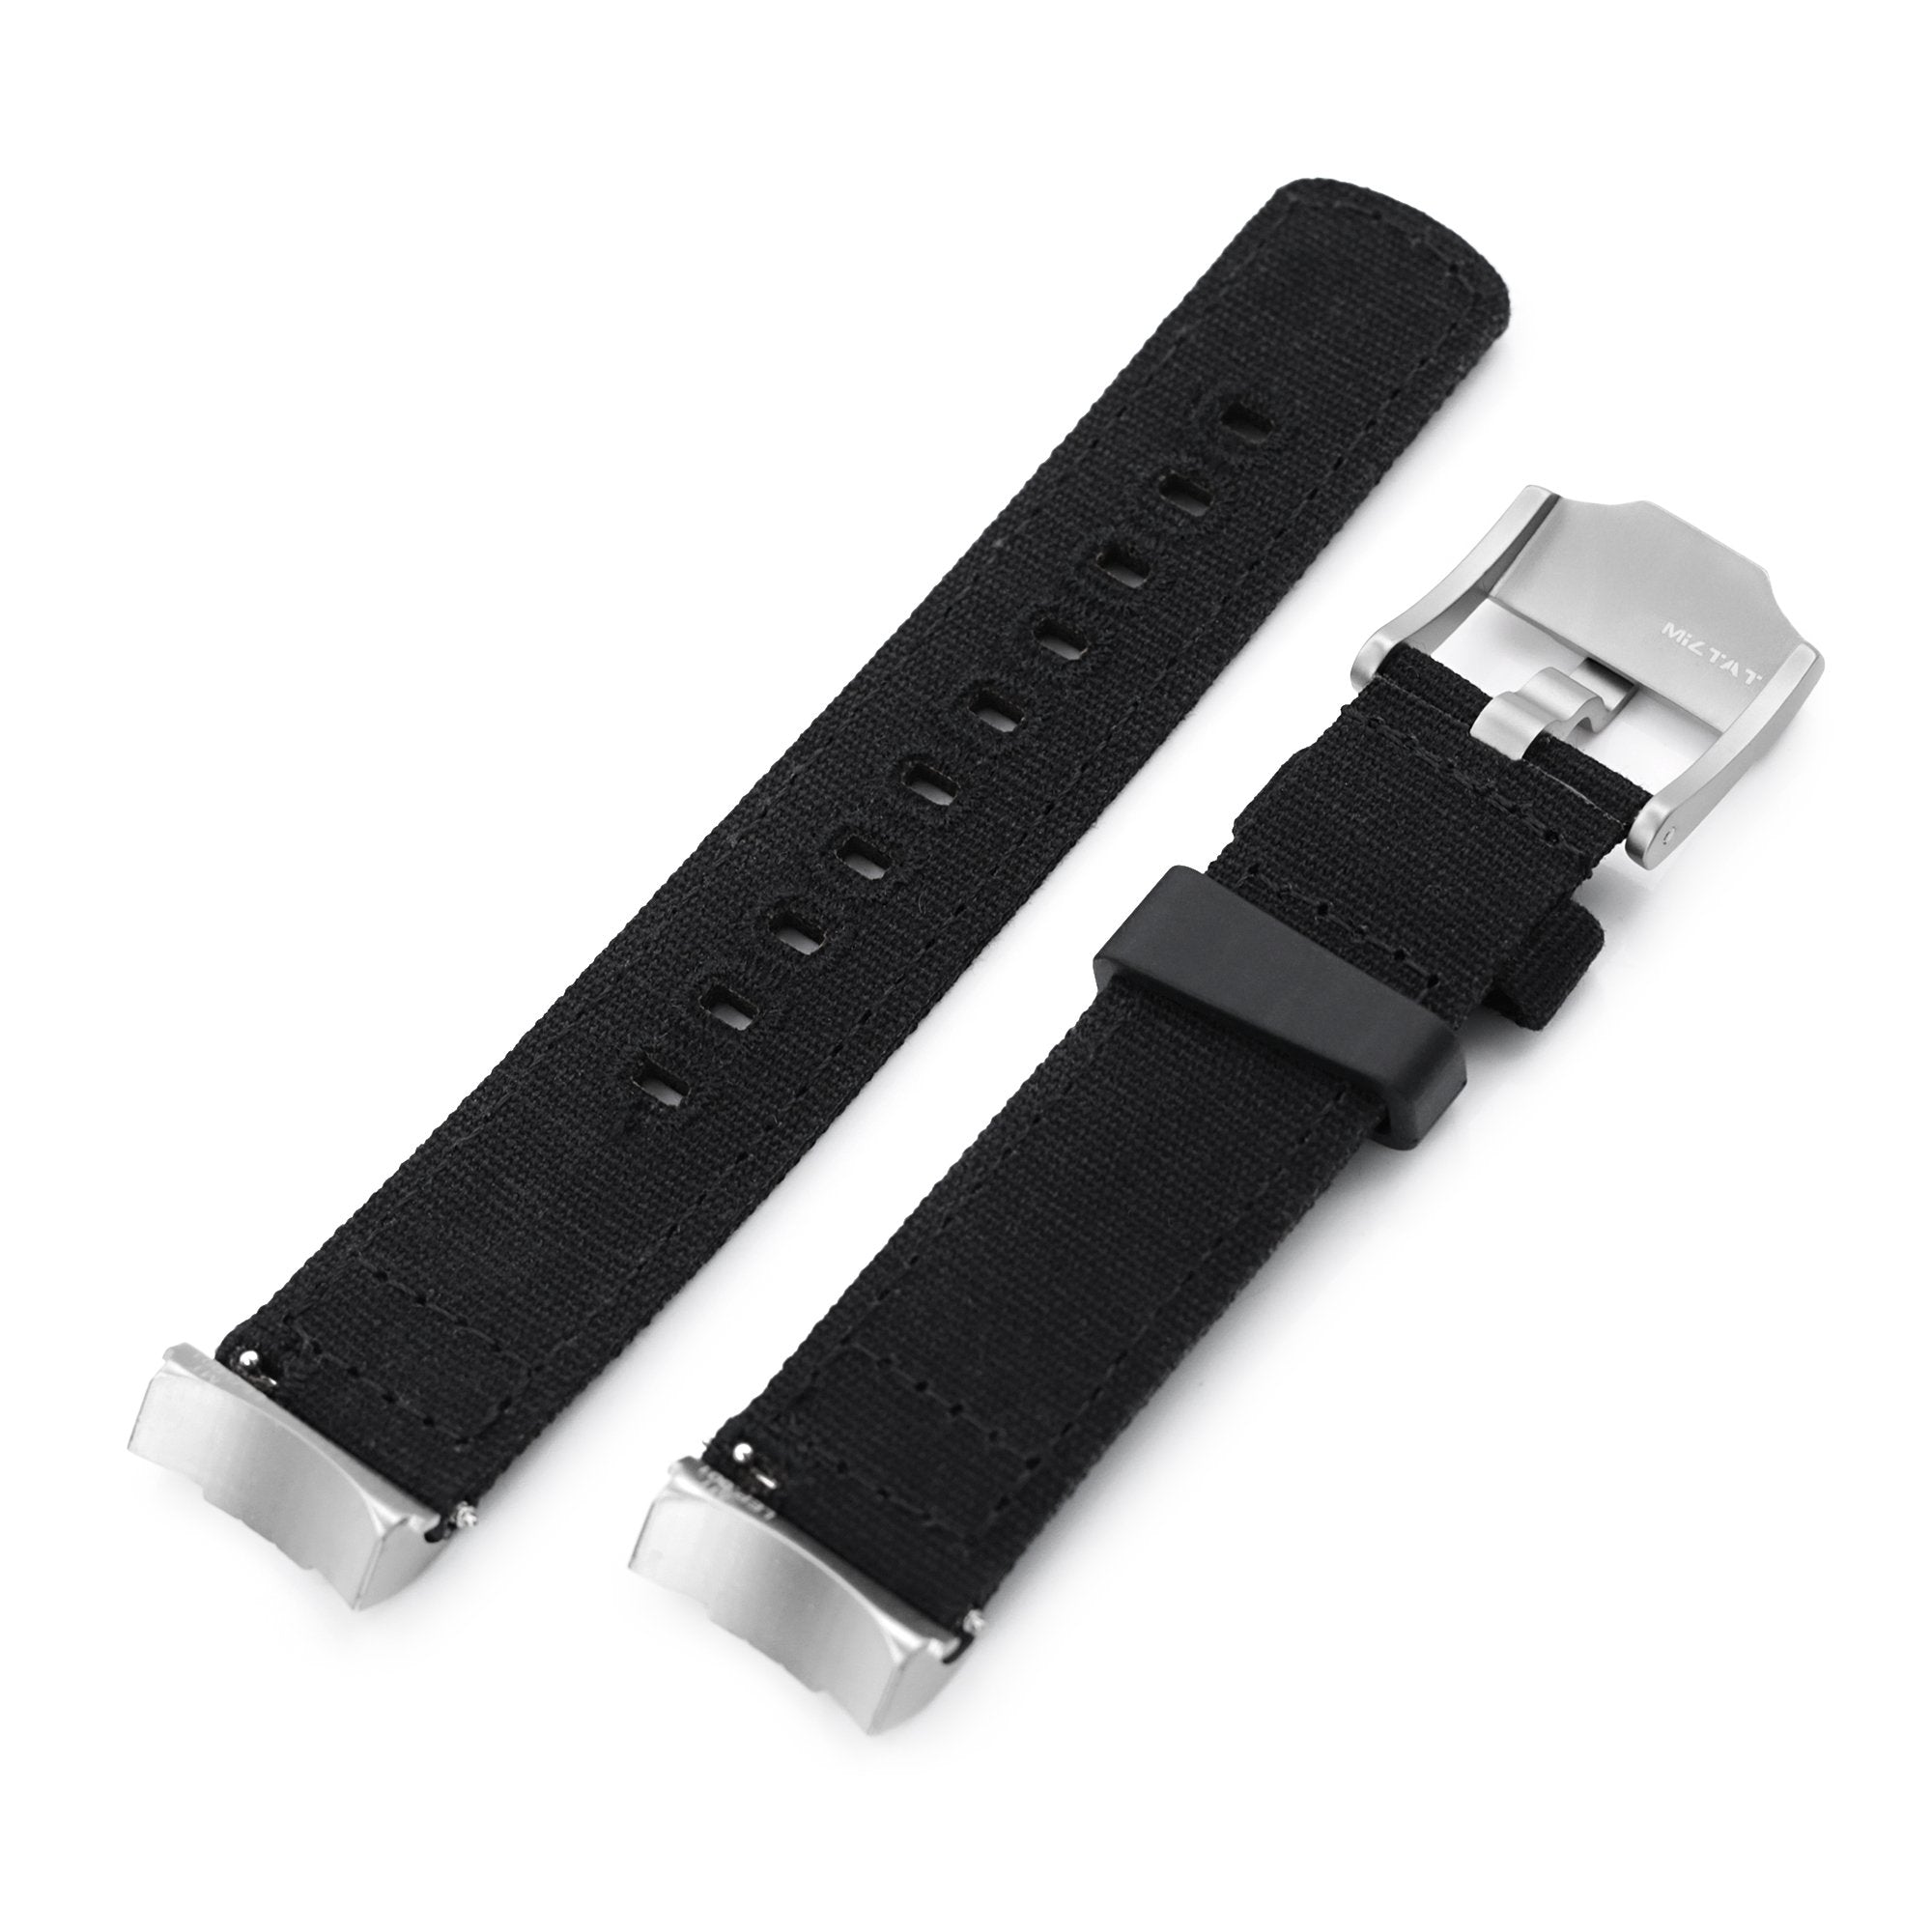 Black Quick Release Canvas + Add-on End Piece watch strap for Seiko Sumo SPB103 Strapcode Watch Bands